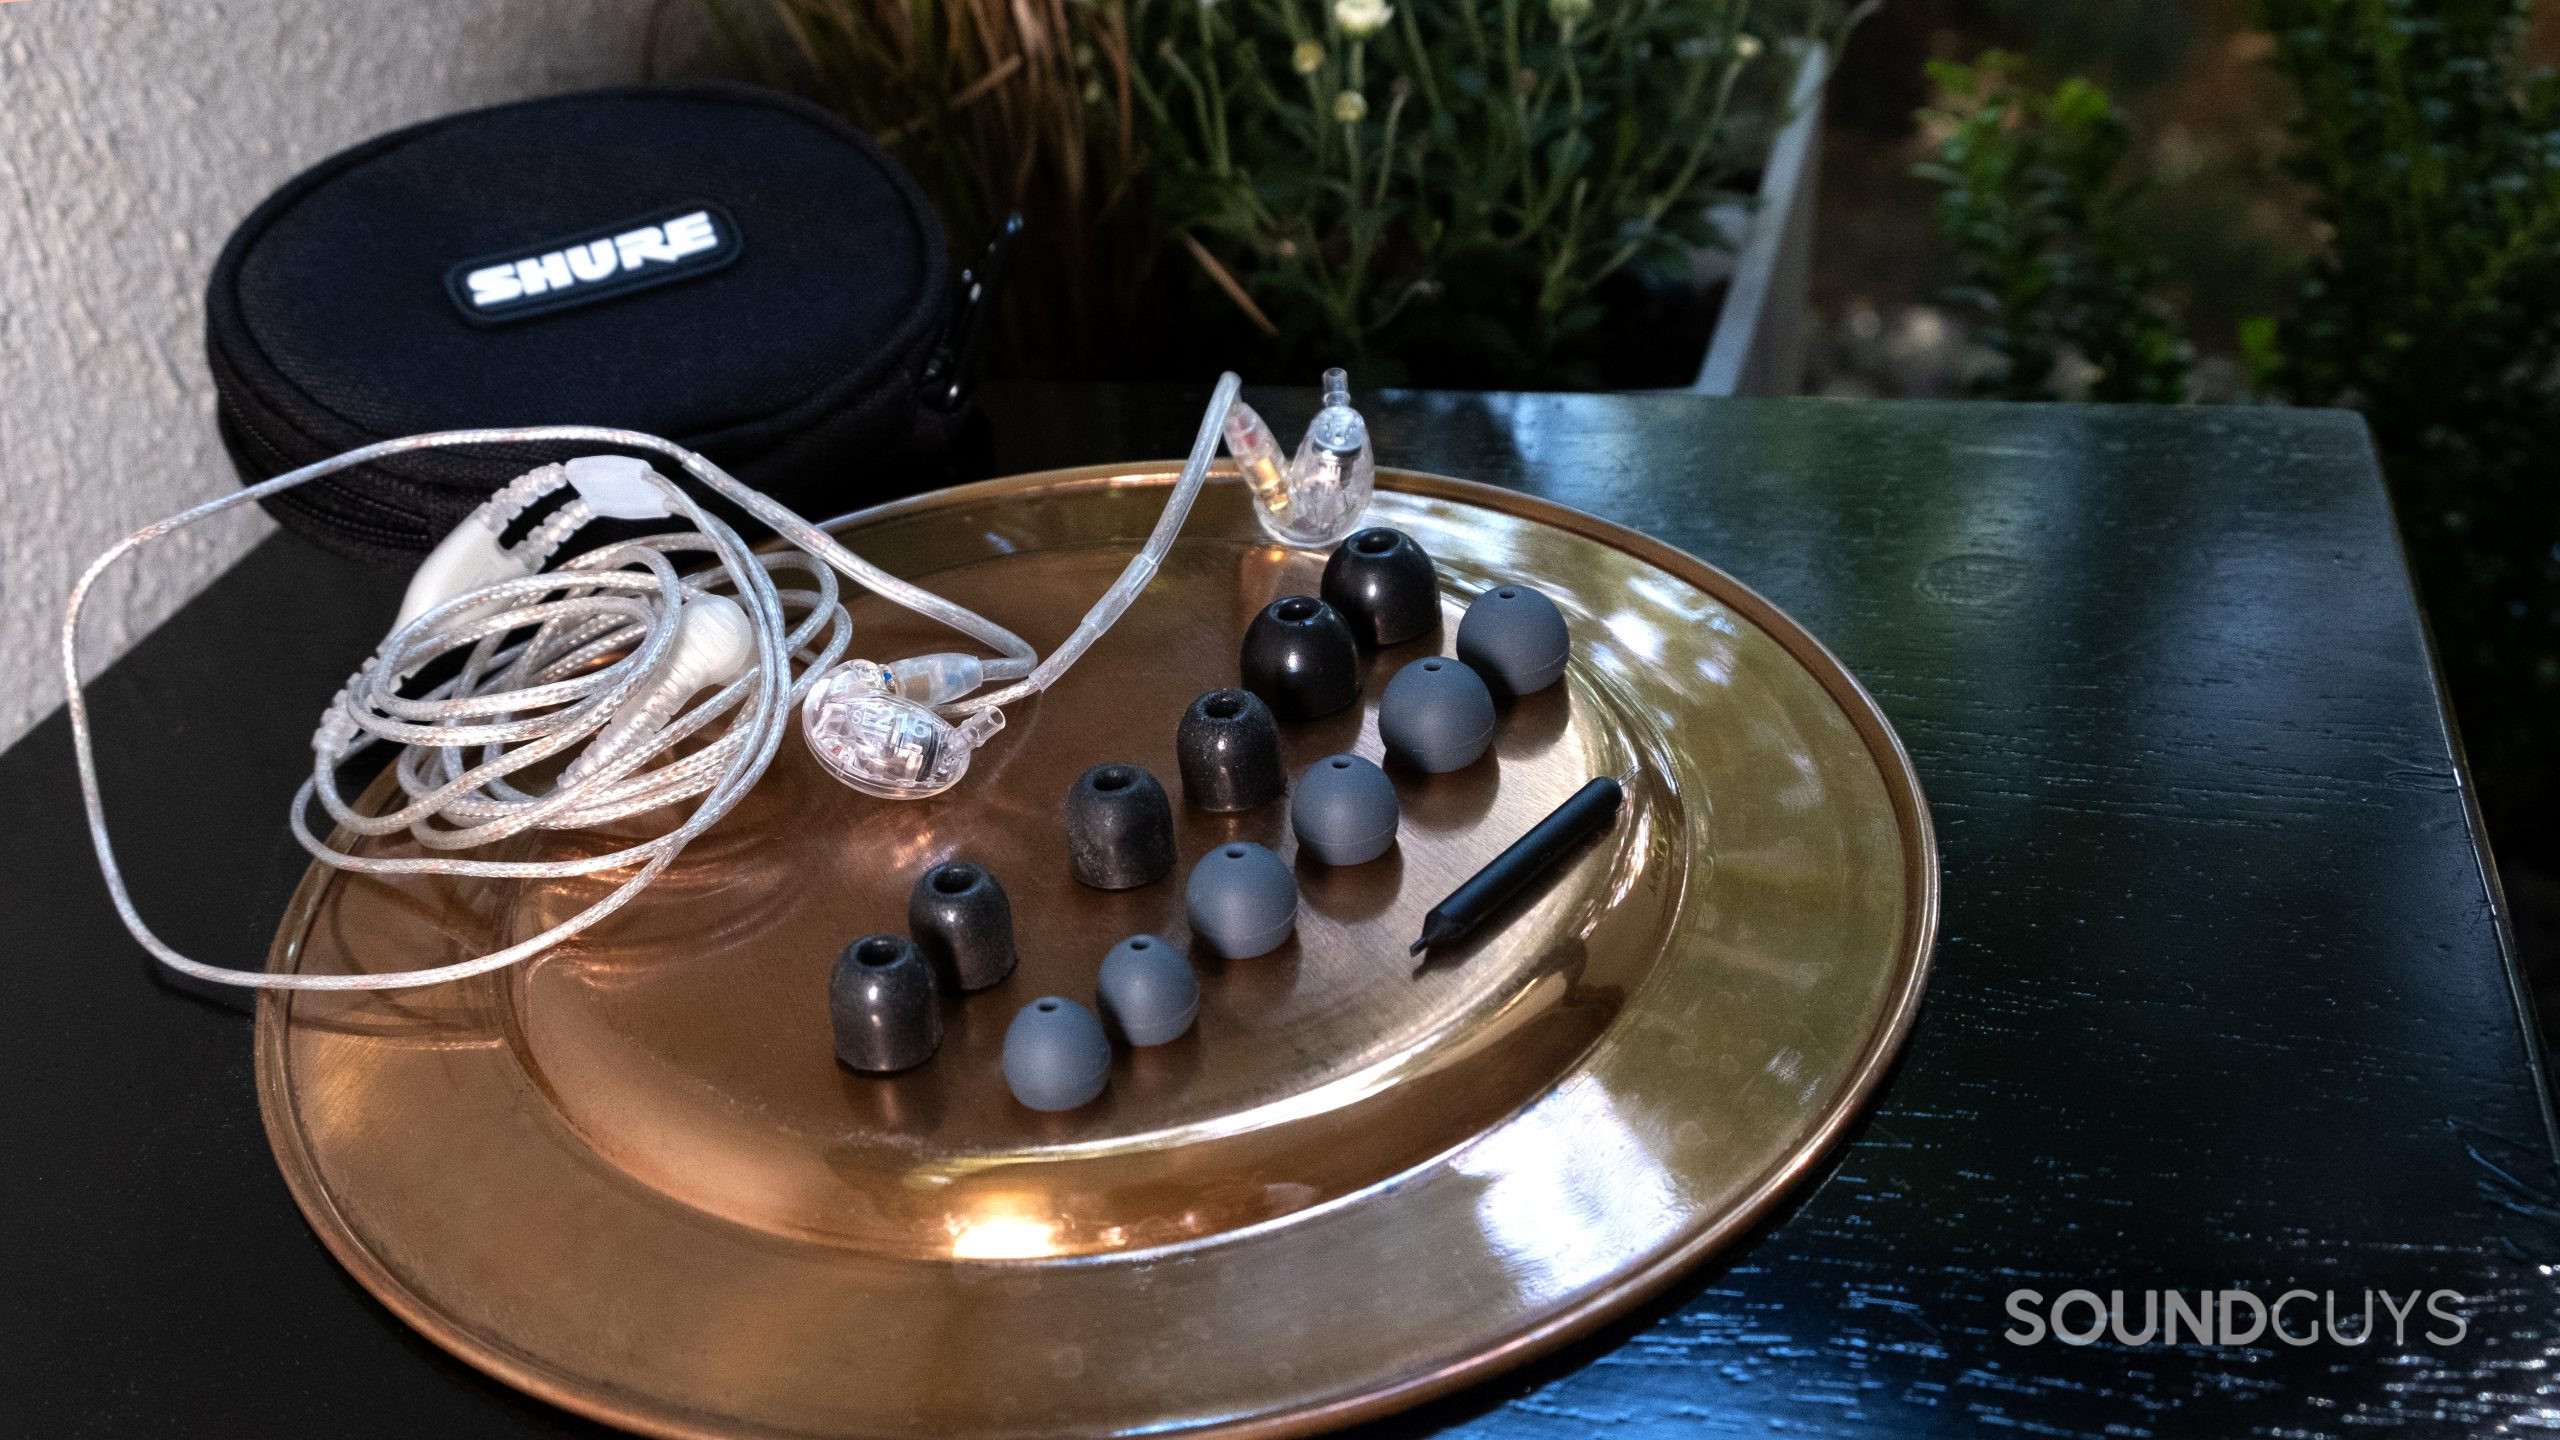 On a brass colored surface the full set of ear tips and the Shure SE215 sit outside on a black table with plants in the background.